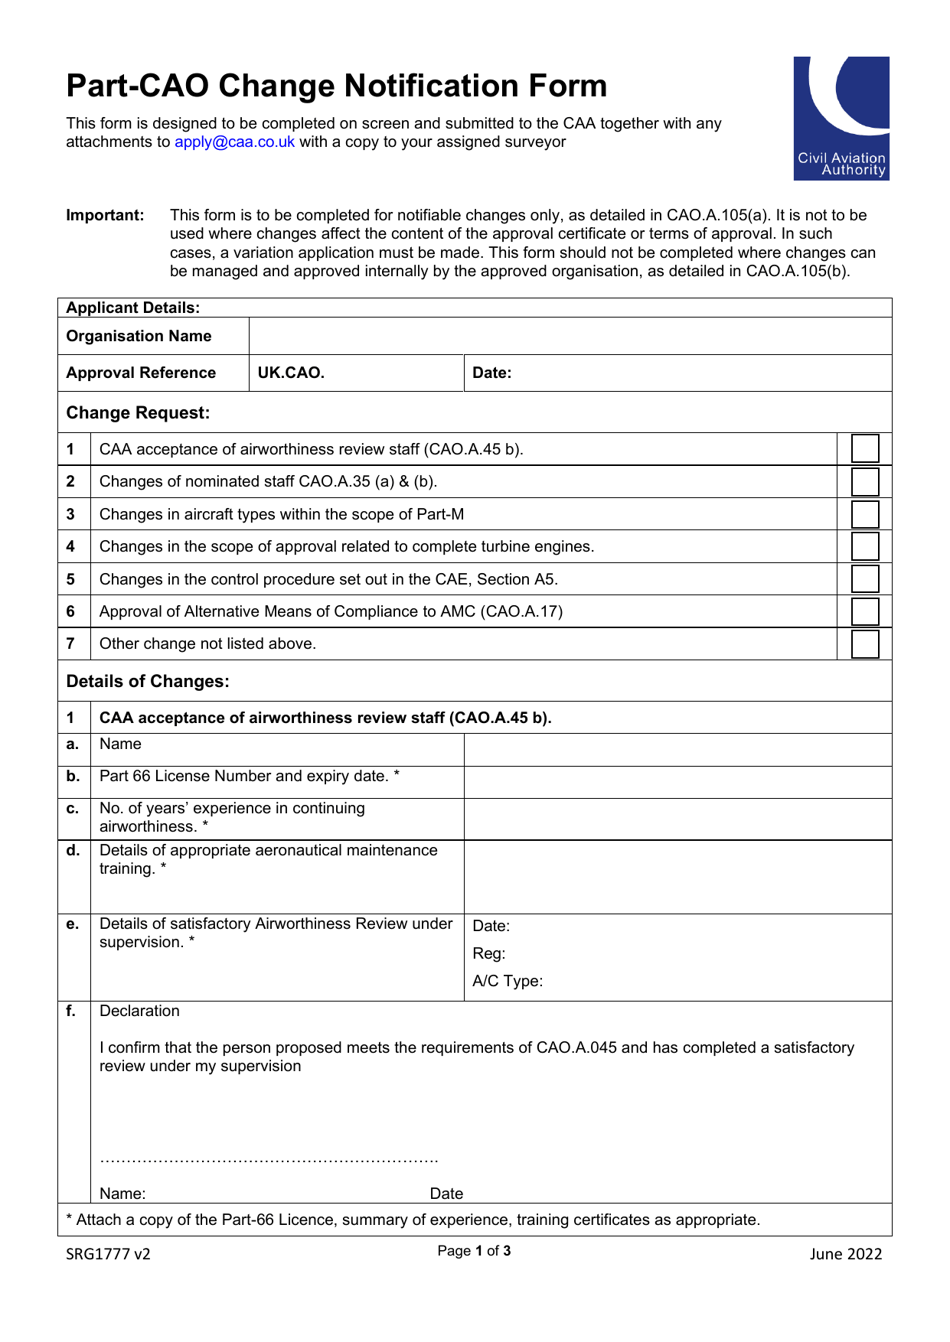 Form SRG1777 Part-Cao Change Notification Form - United Kingdom, Page 1